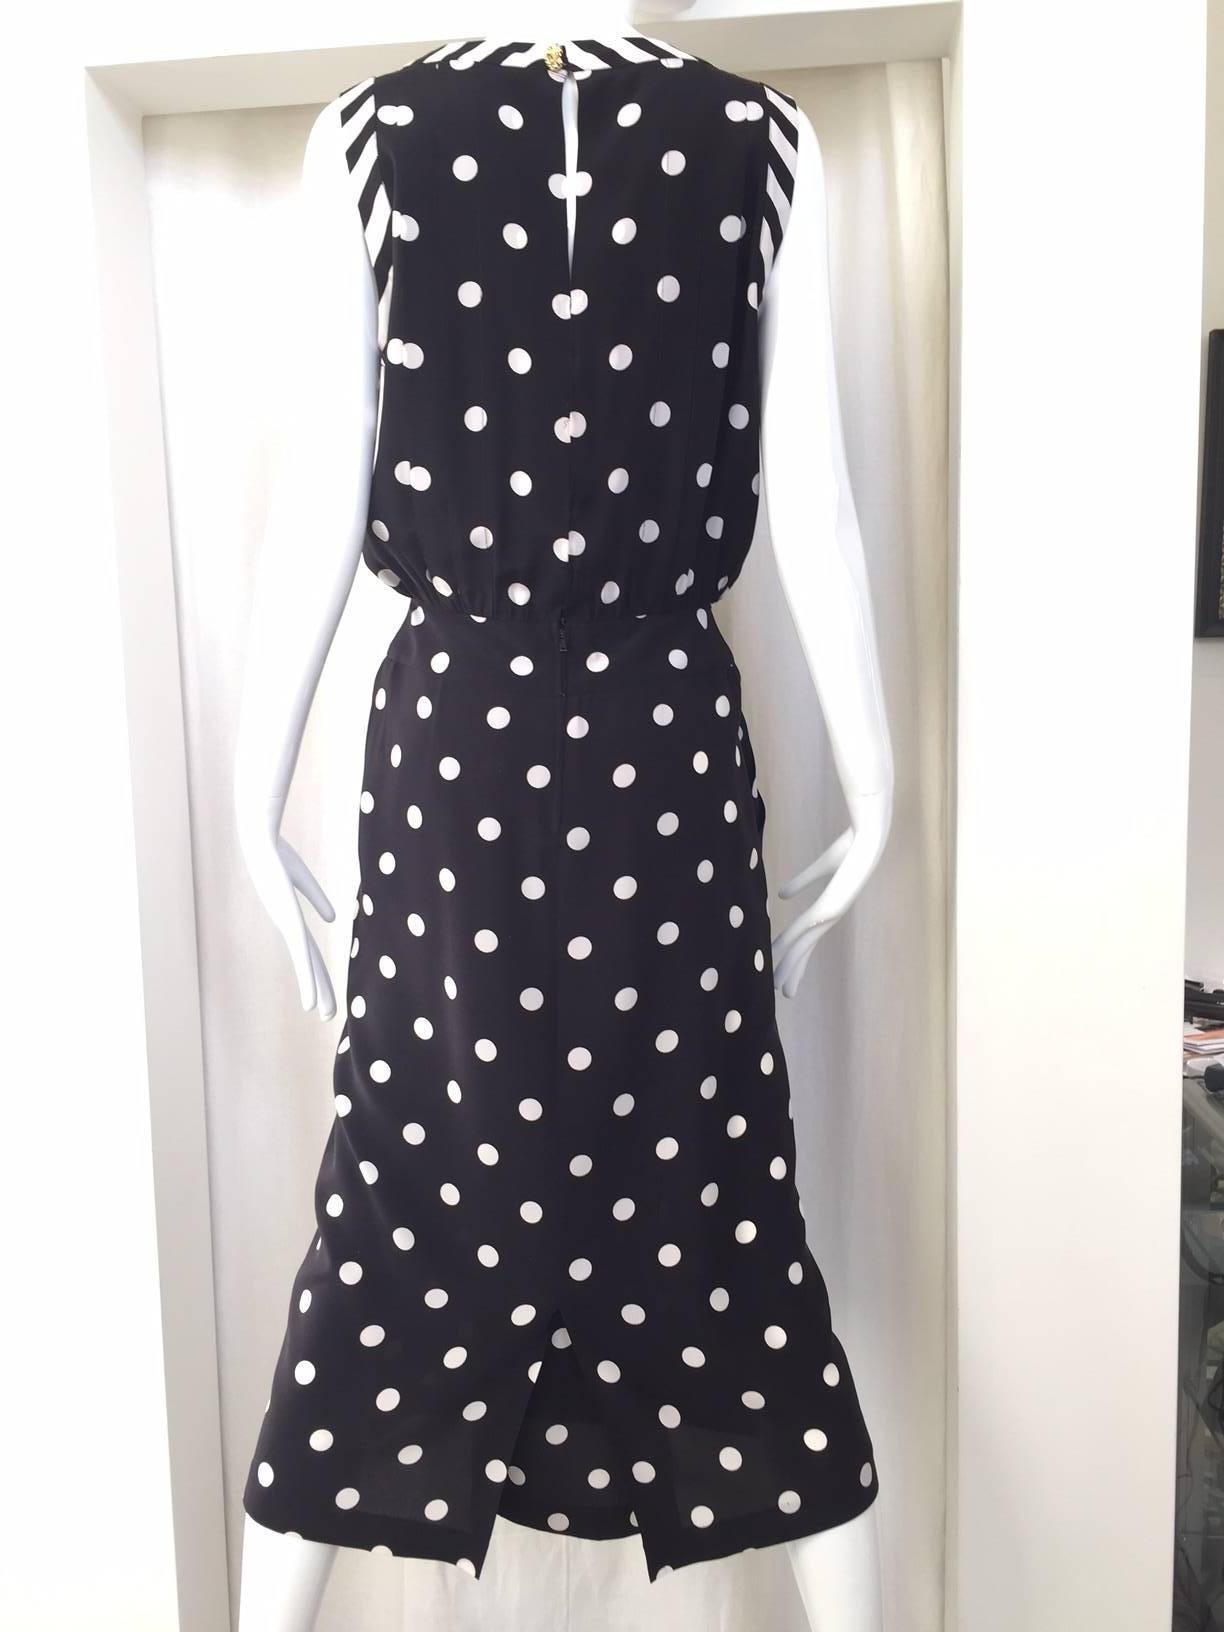 1980s CHANEL silk polka dot dress with tie.
Fit size 4/6
Here is the exact measurement;
Bust : 36